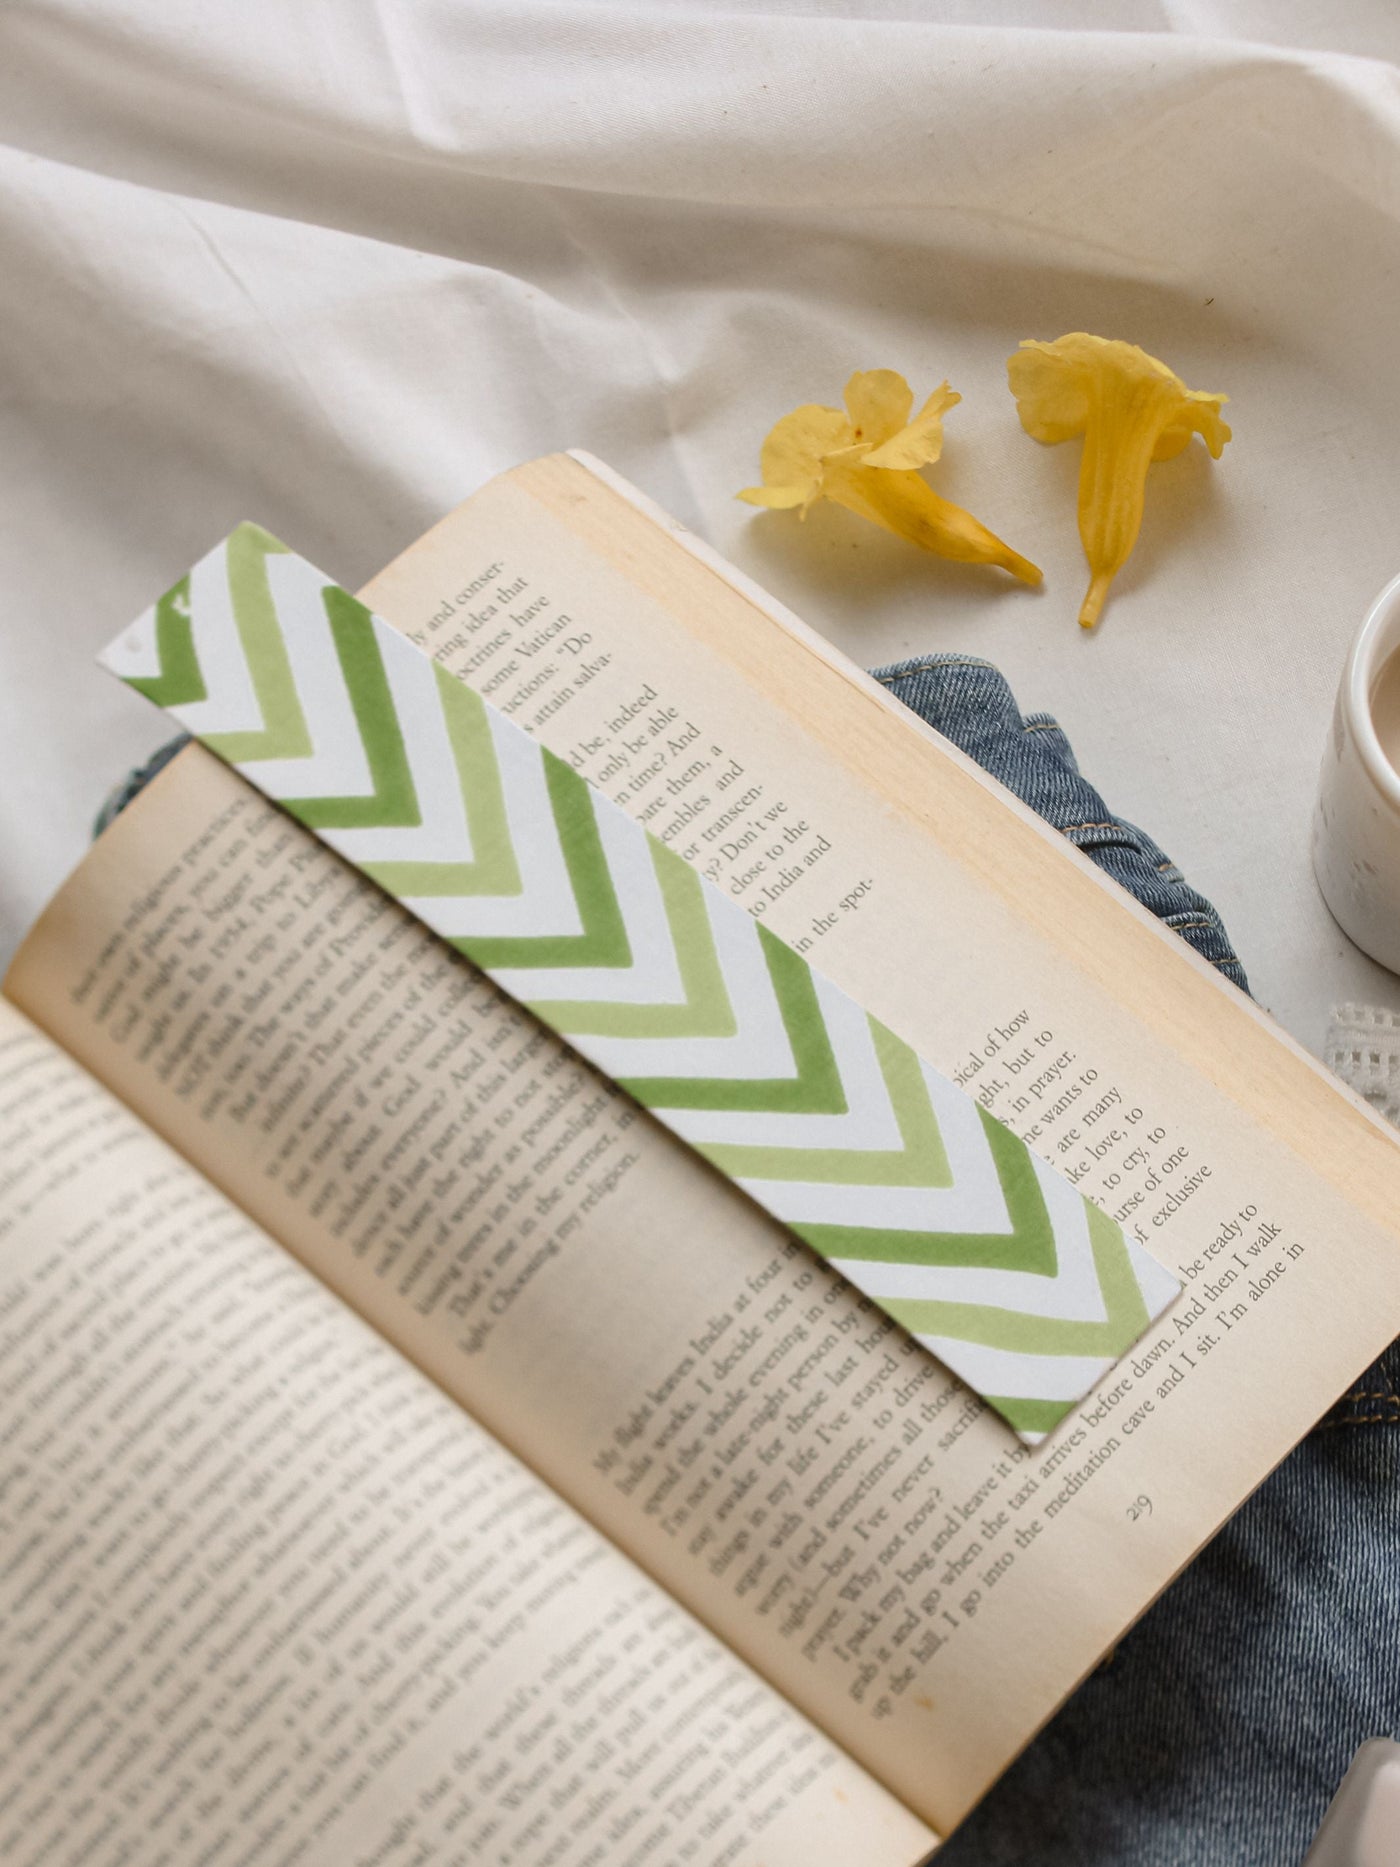 Upcycled BookMarks Grn Chevron